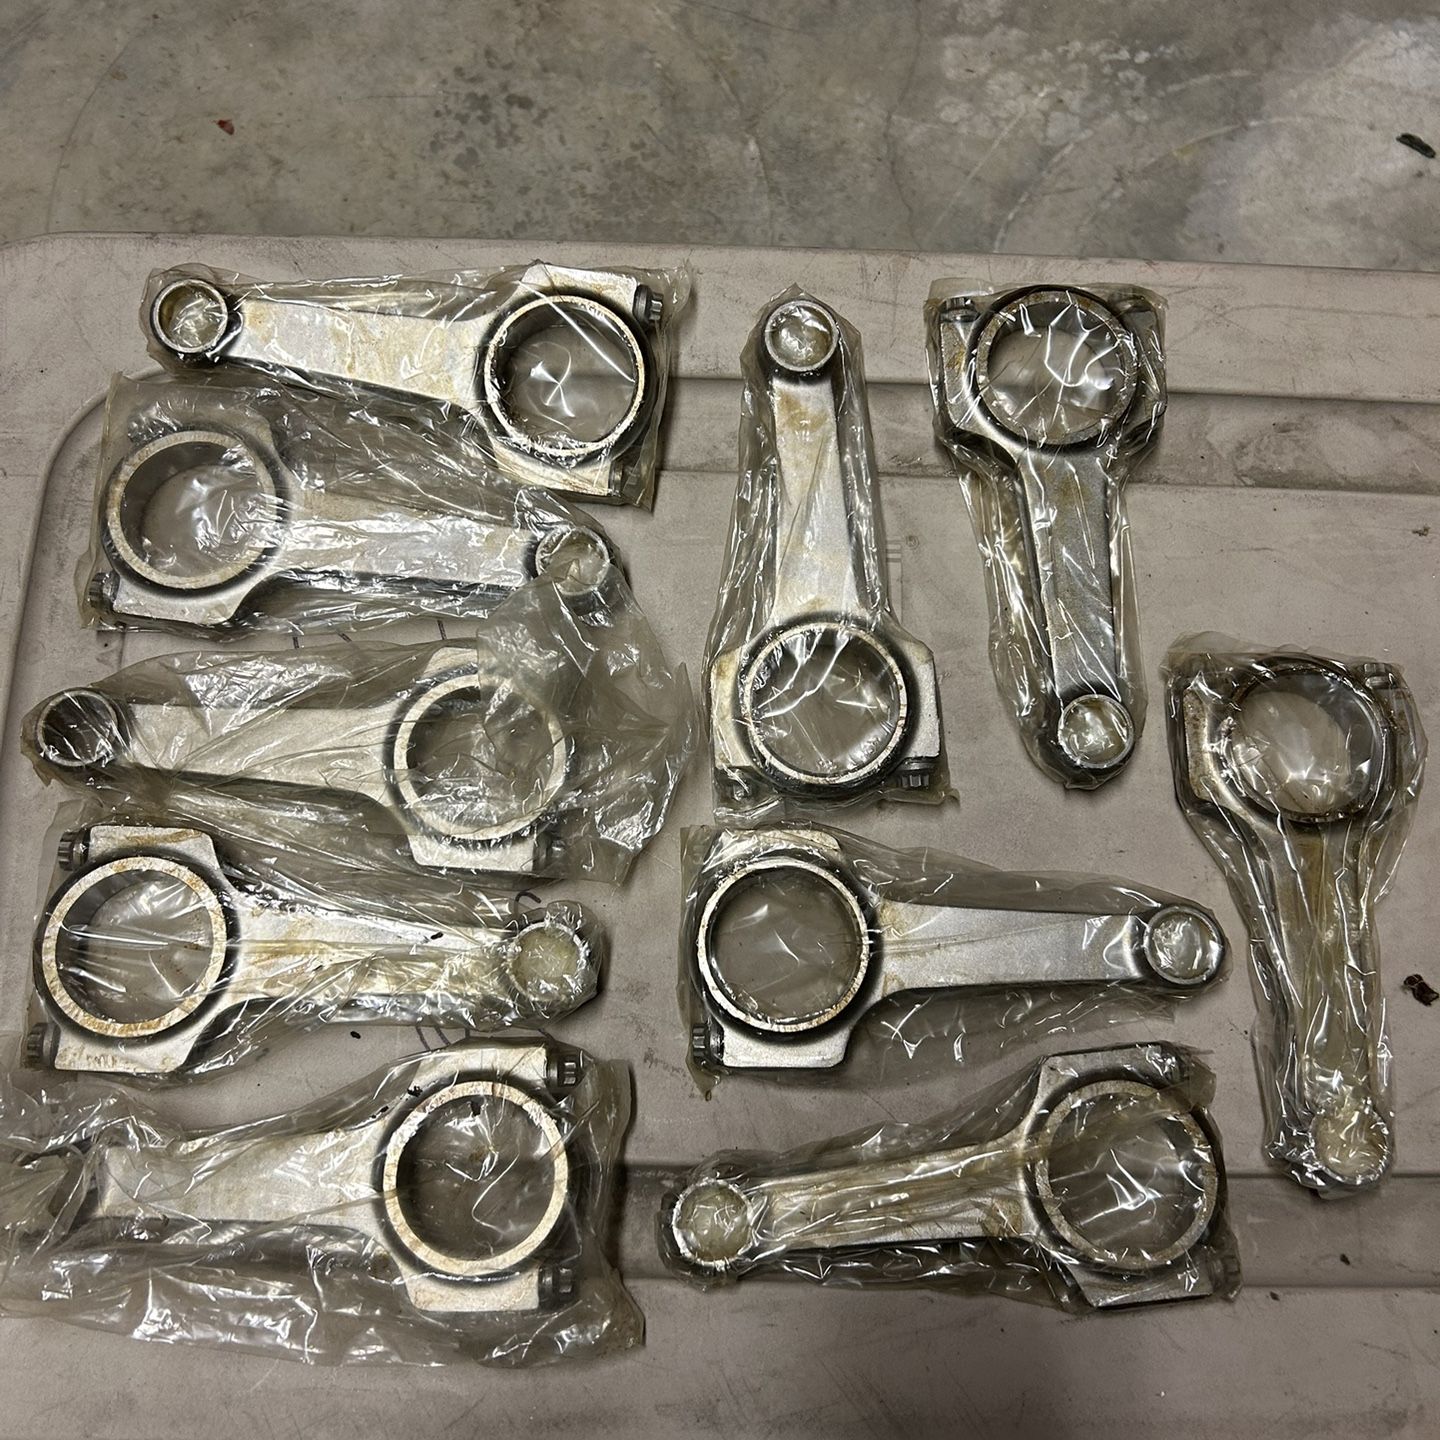 Small Block Chevy Rods